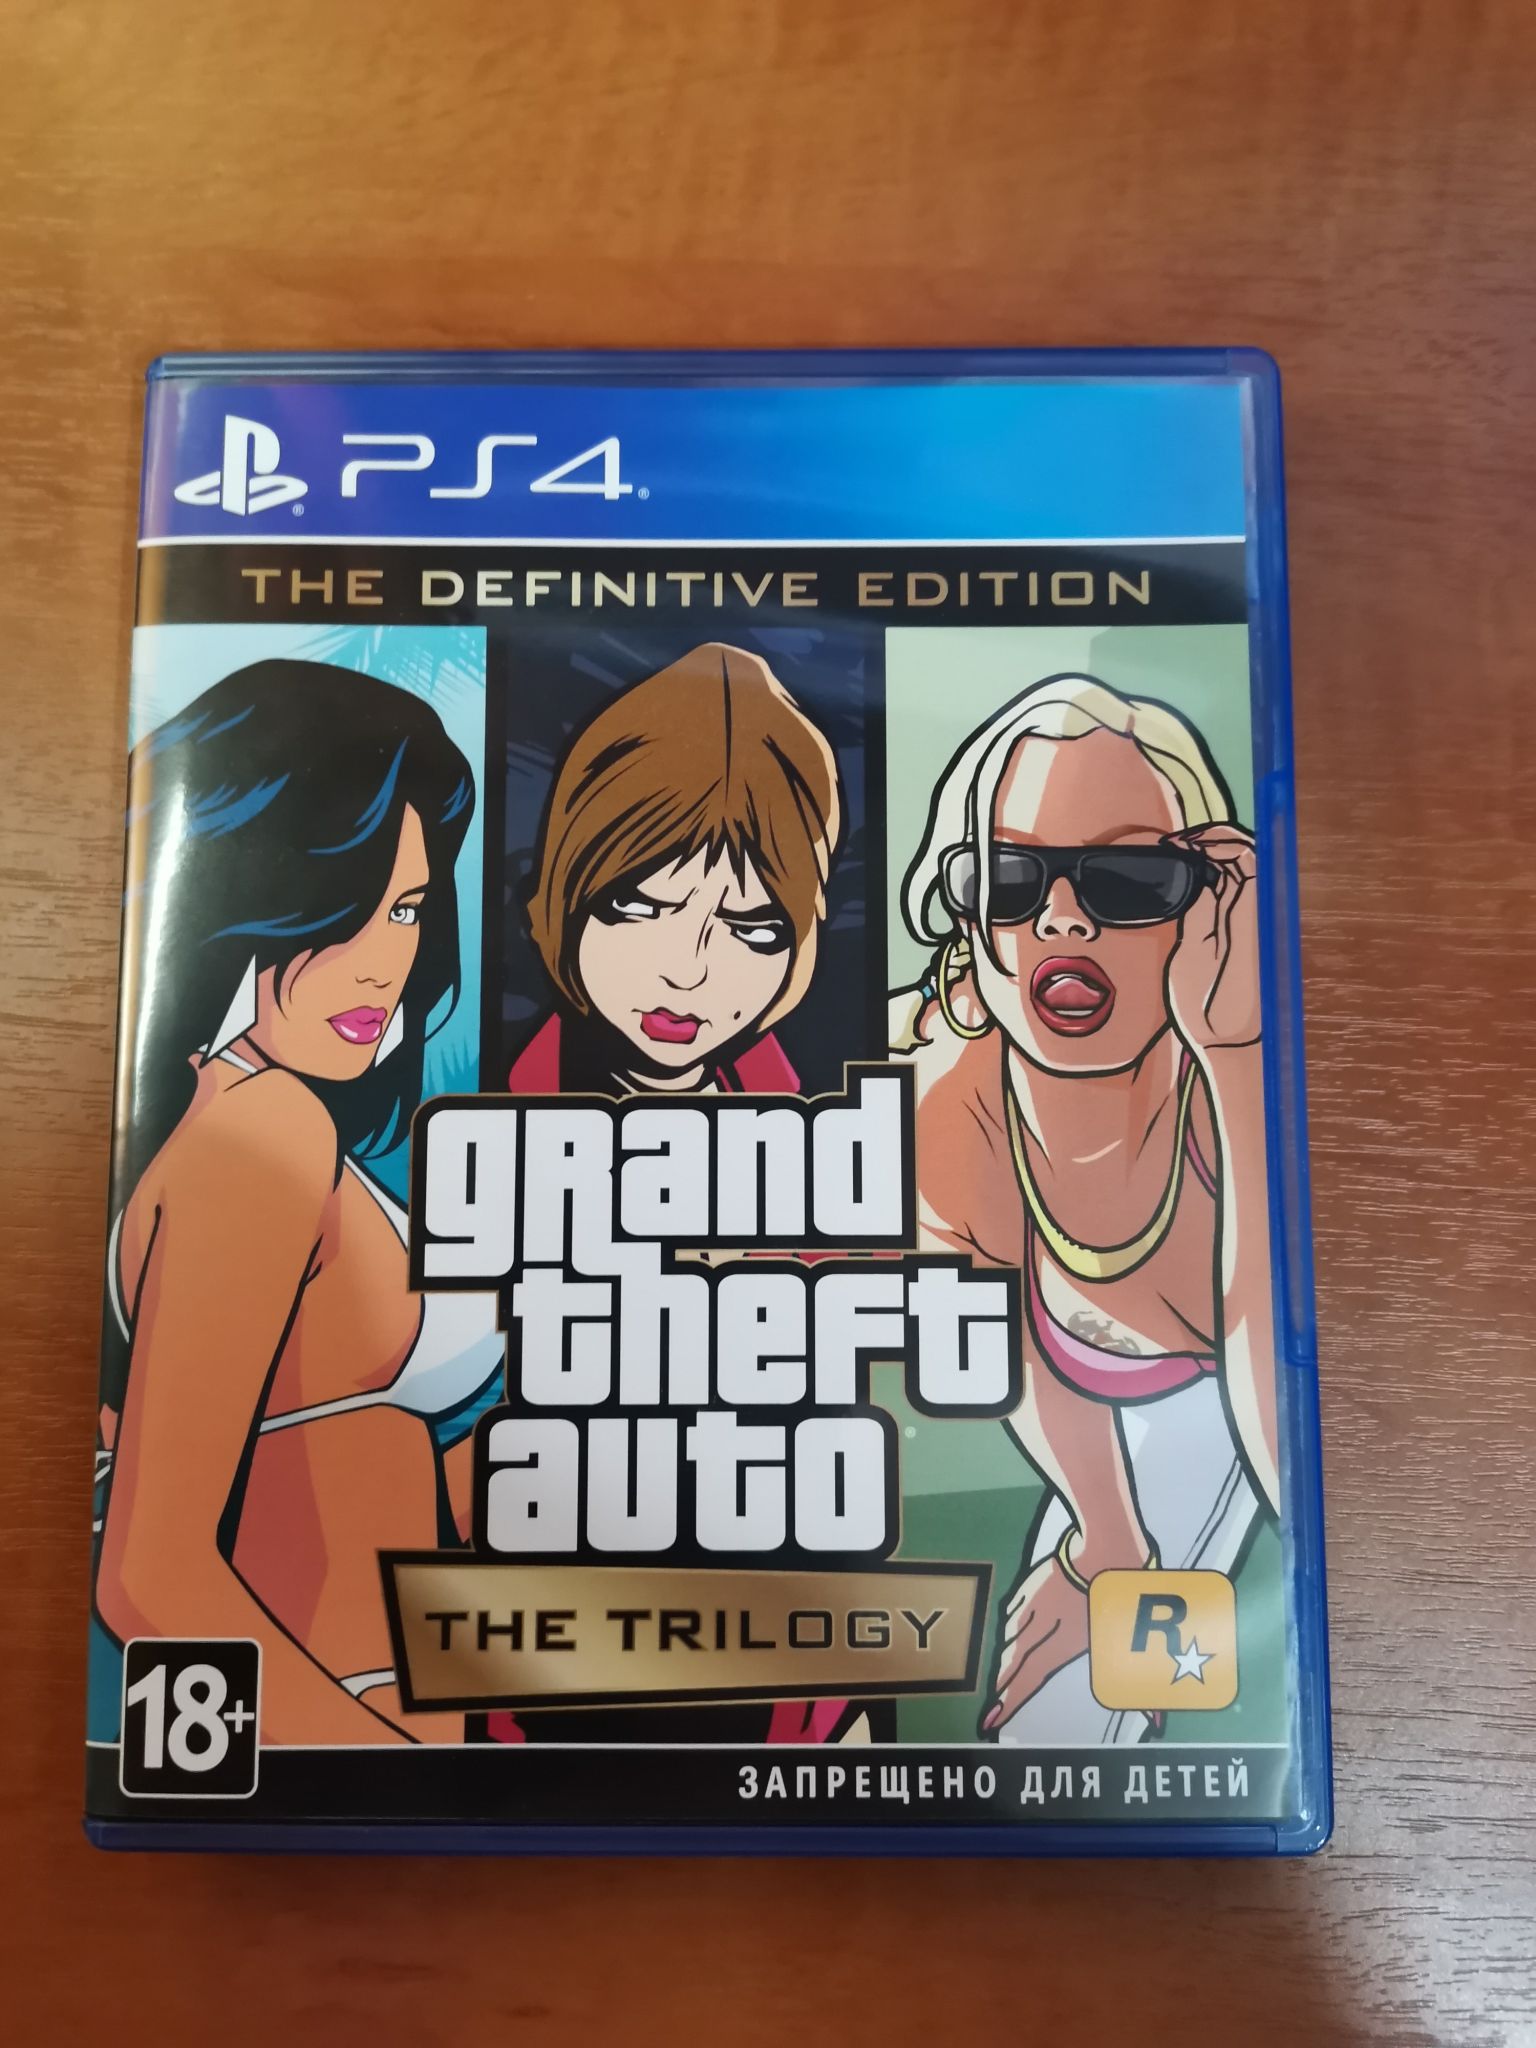 Gta the trilogy the definitive edition. Grand Theft auto the Trilogy ps4. Grand Theft auto: the Trilogy – the Definitive Edition обложка ps4. GTA the Trilogy the Definitive Edition Nintendo Switch. GTA Trilogy Definitive Edition ps4.